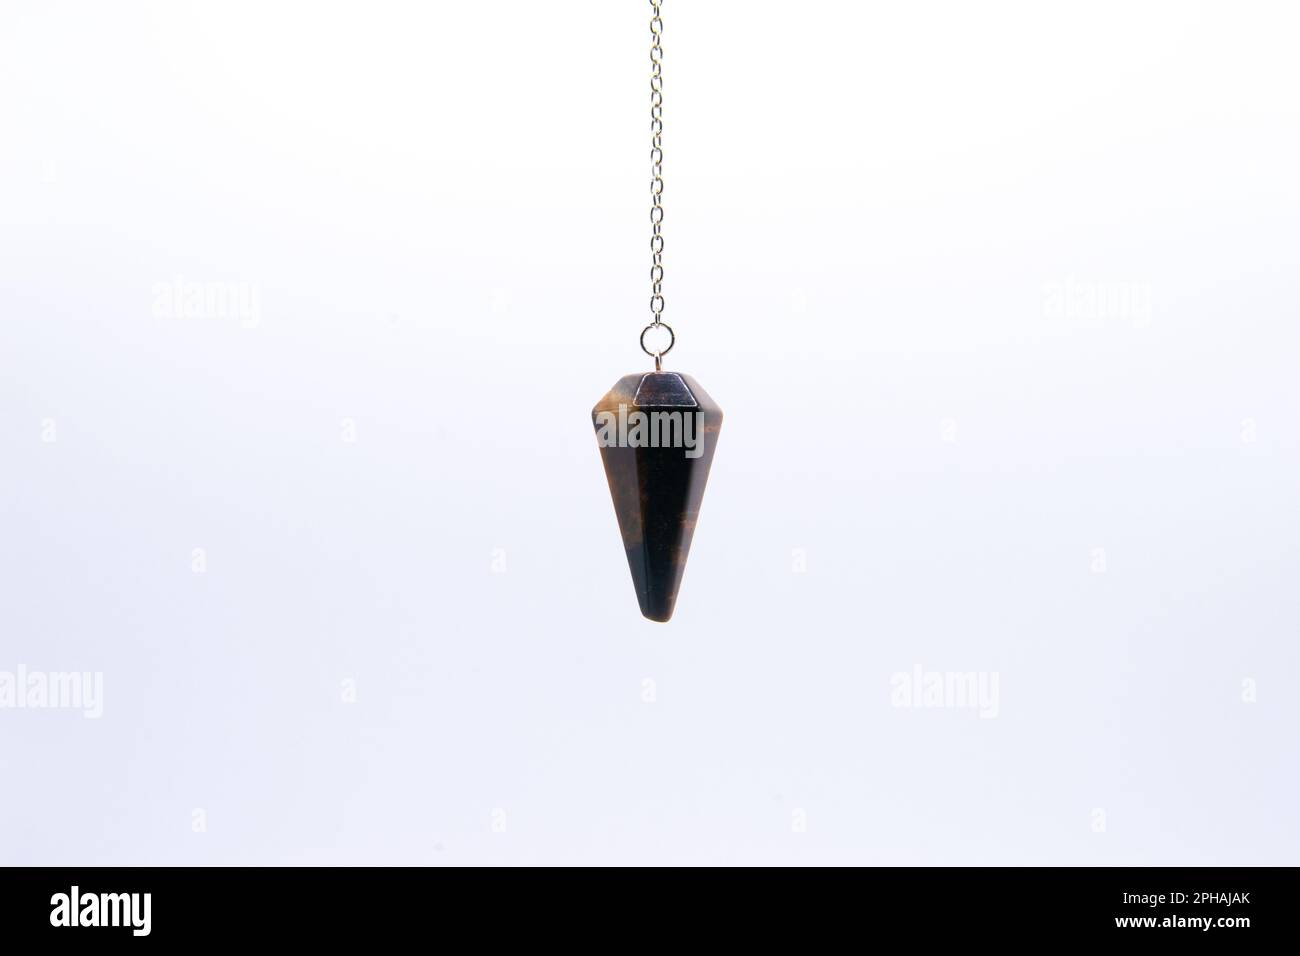 Tiger's eye crystal pendulum on chain isolated on white background. Stock Photo